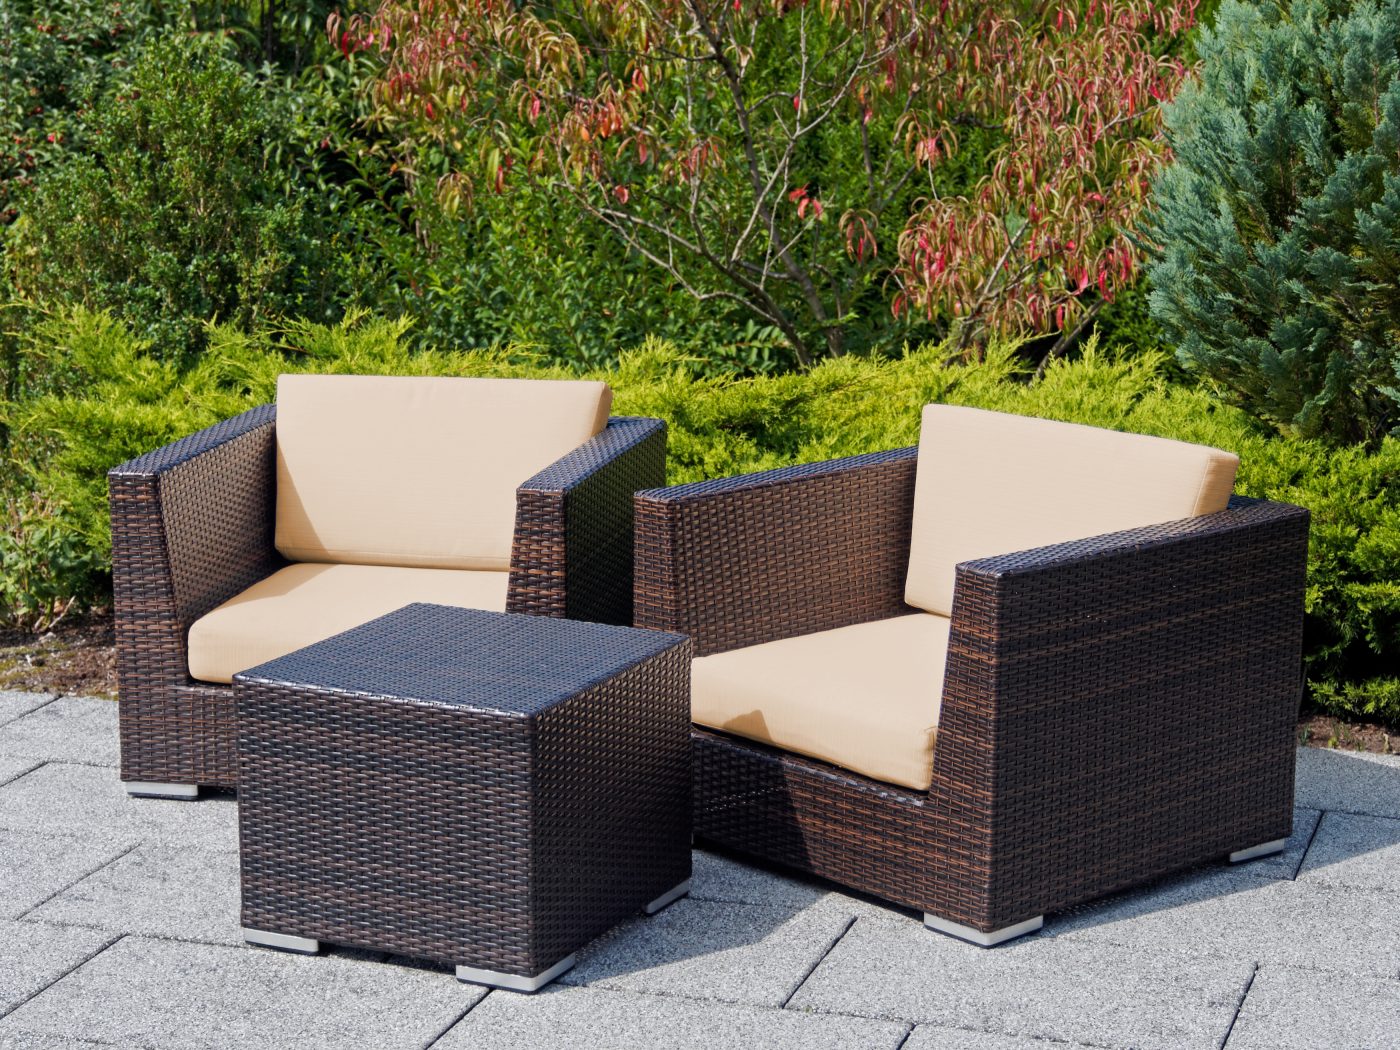 Group of outdoor furniture rattan armchairs with table on terrace